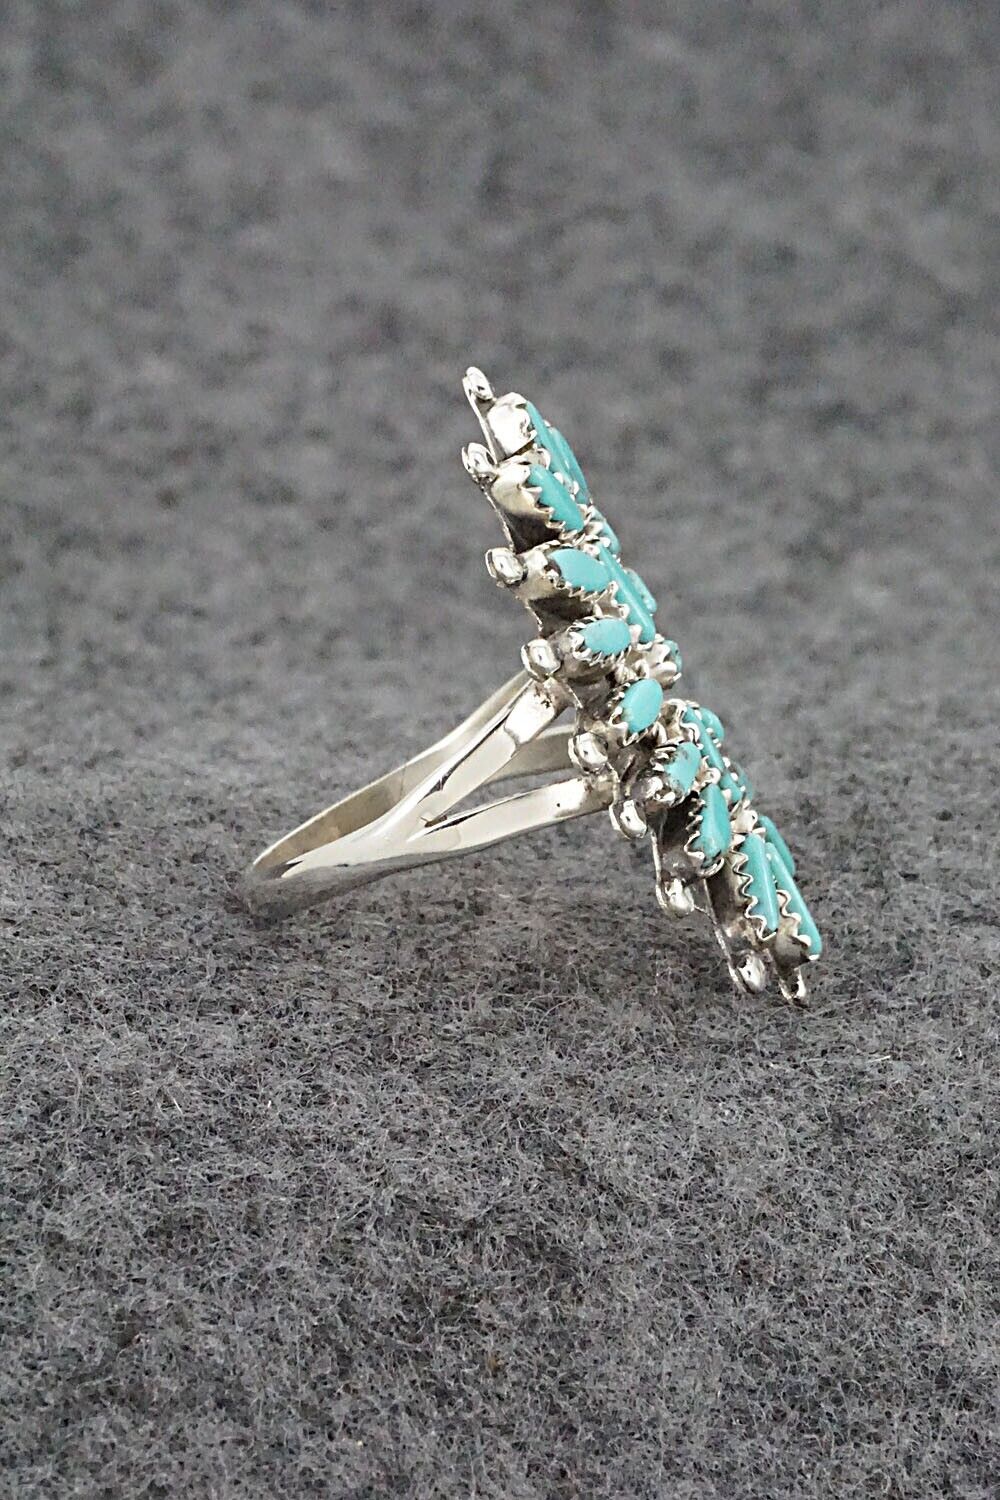 Turquoise & Sterling Silver Ring - Nathaniel Nez - Size 10